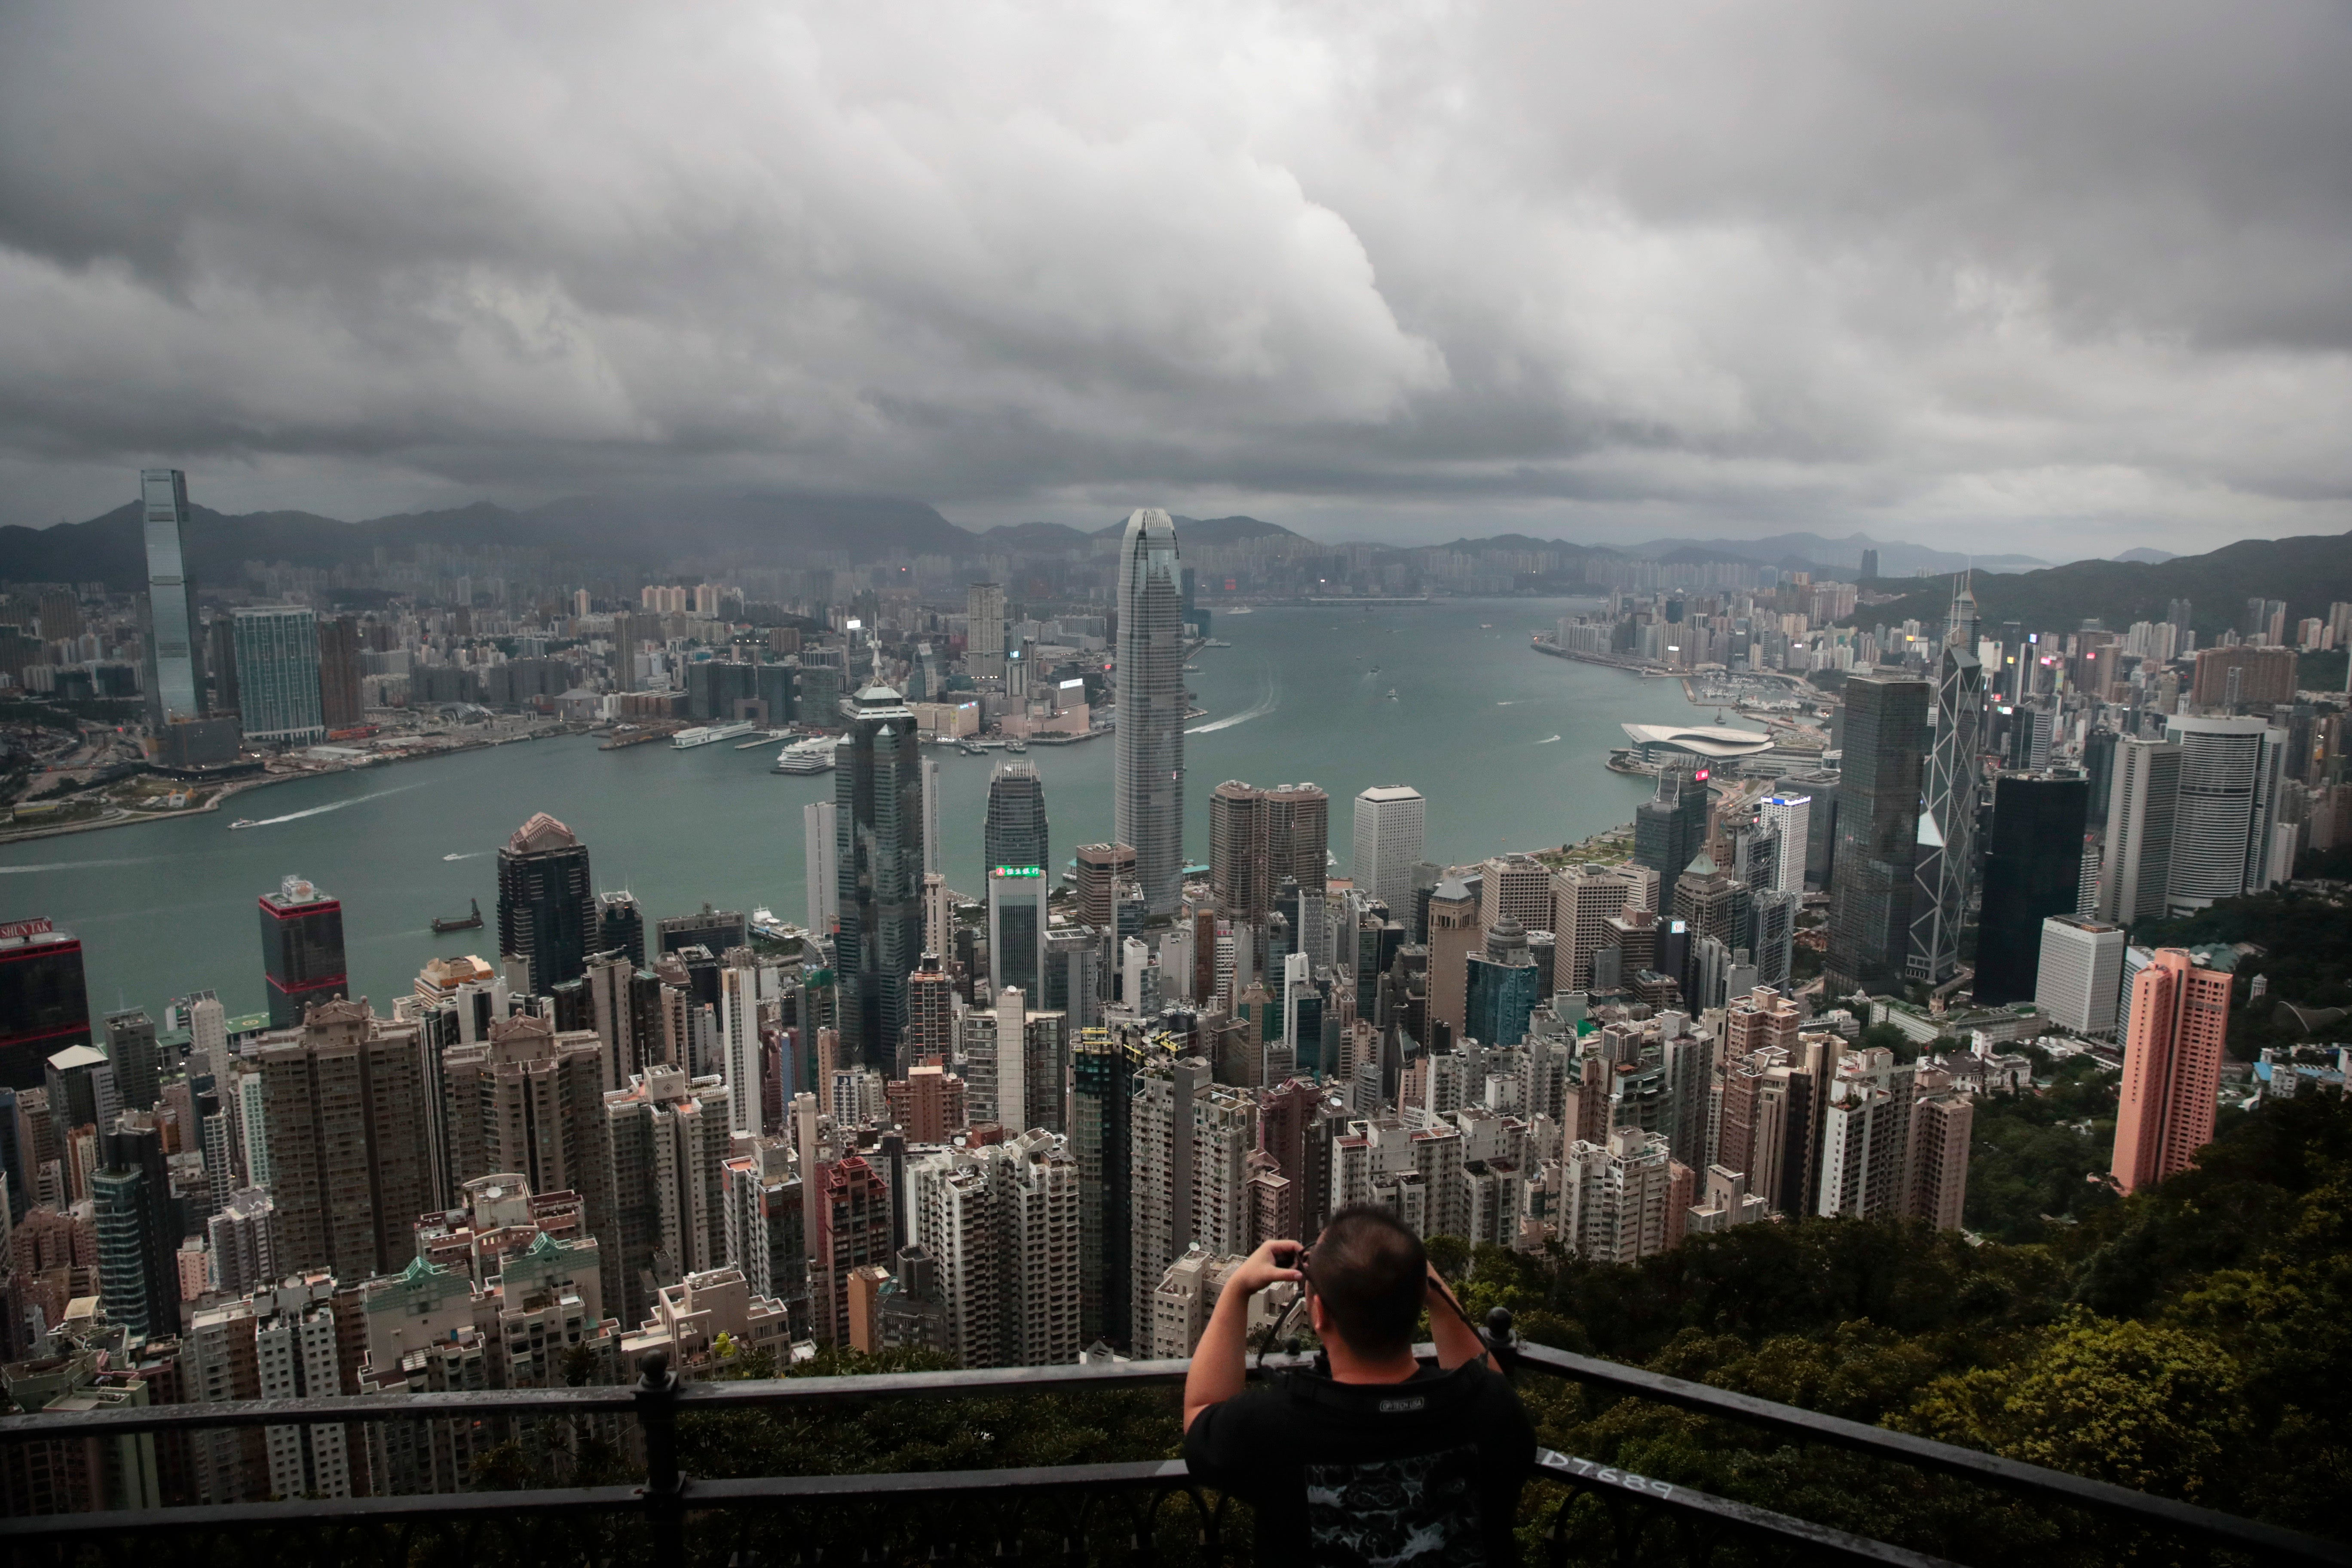 Representative image. Hong Kong’s risk level is currently low, according to CDC